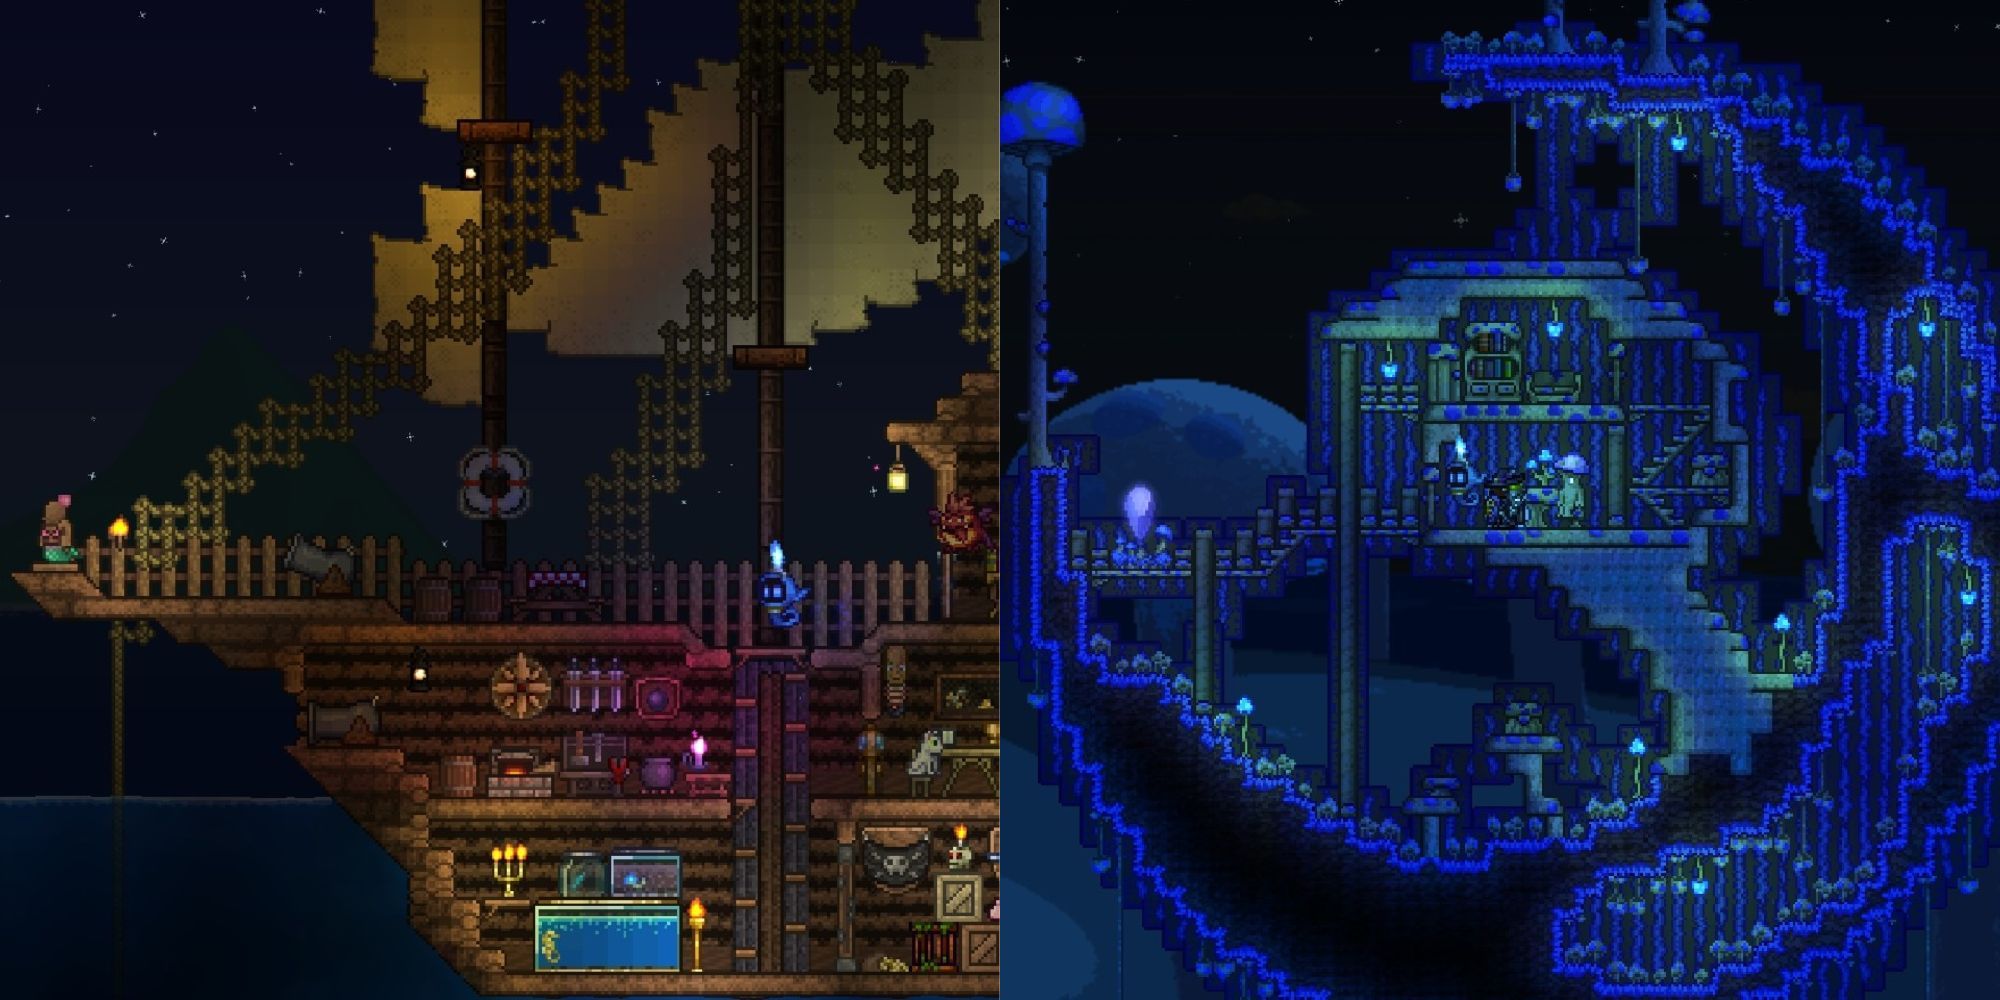 Terraria house requirements, ideas, and designs